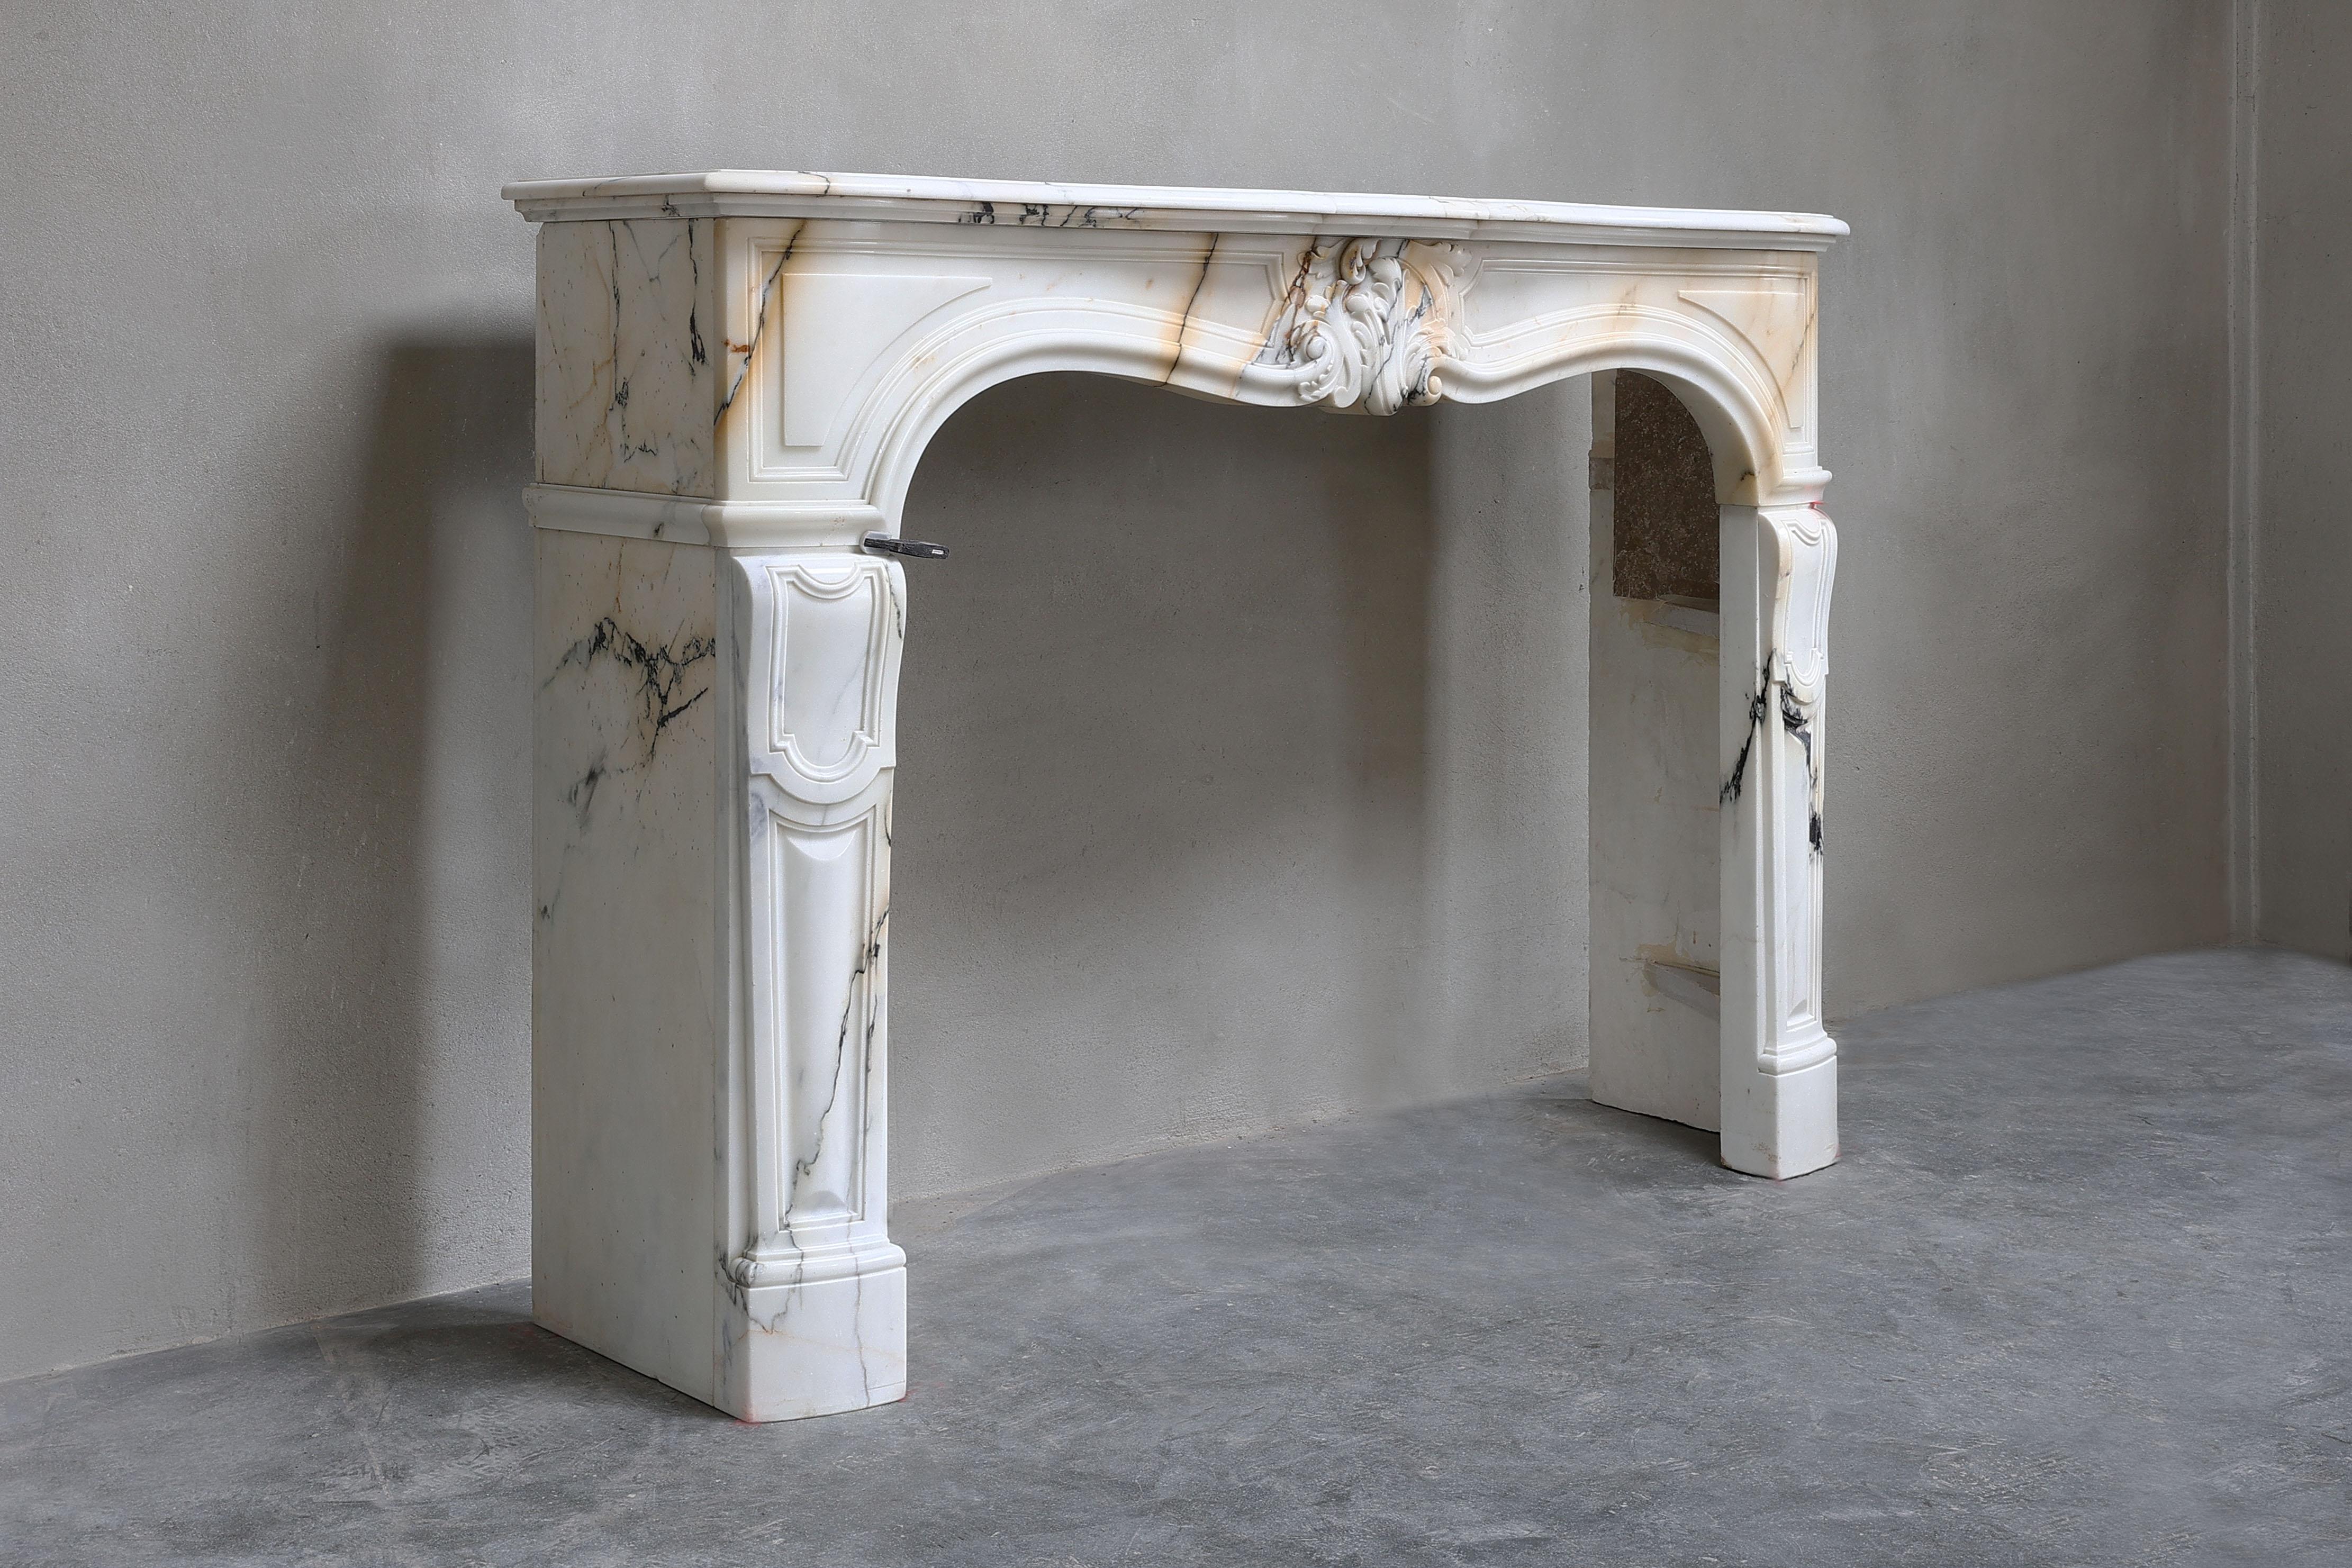 Very beautiful antique fireplace of the rare marble Paonazzo from Italy. This fireplace has a warm color scheme, beautiful veins and beautiful round shapes. The fireplace is in Louis XV style and has an asymmetrical scallop in the center. The origin